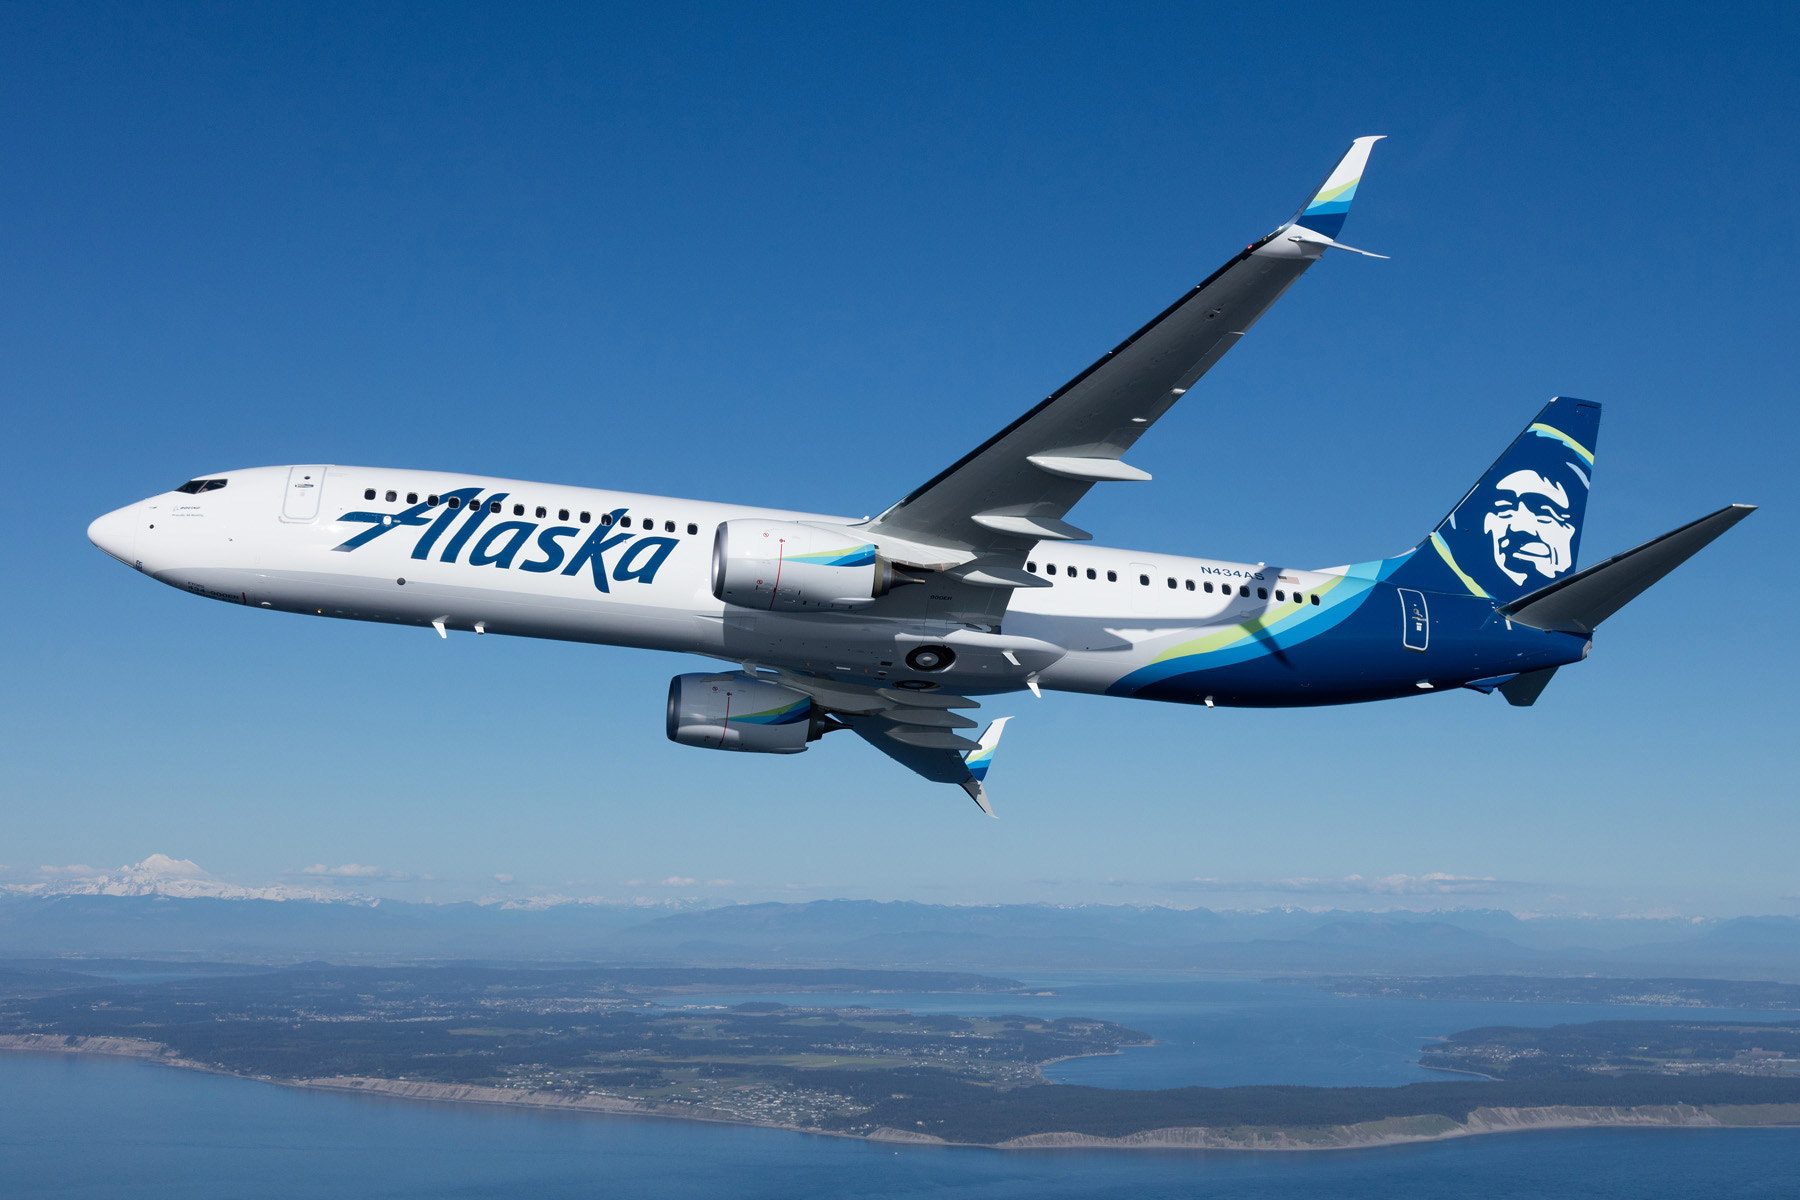 Alaska Airlines jet forced to land due to naked man in 